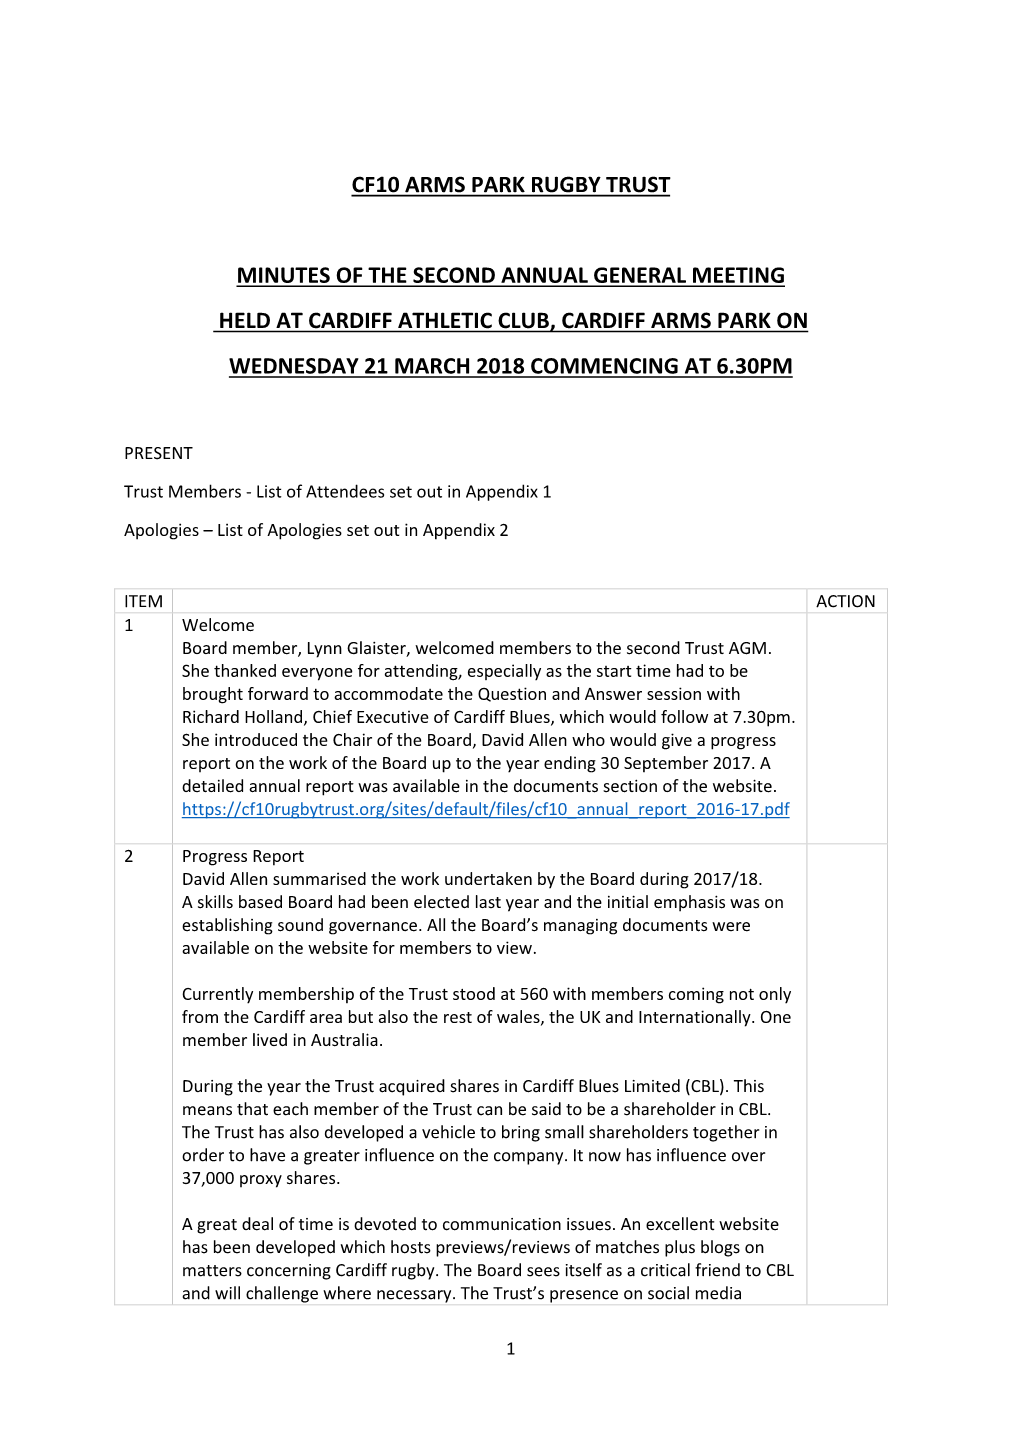 Minutes of AGM 21St March 2018